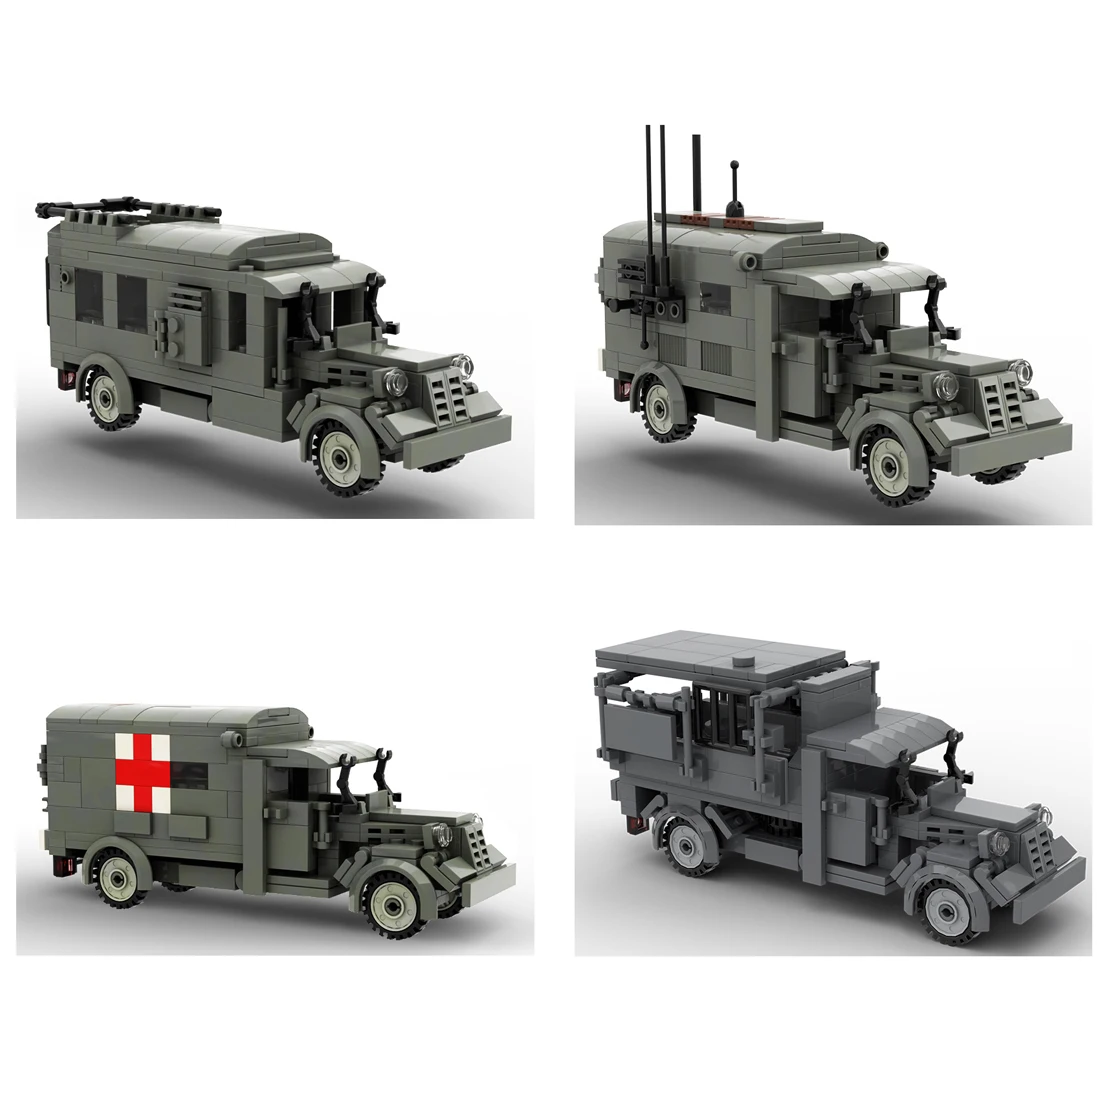 

hot military WWII technical Germany army opels transport command Medical supply vehicles war weapon block model bricks toys gift